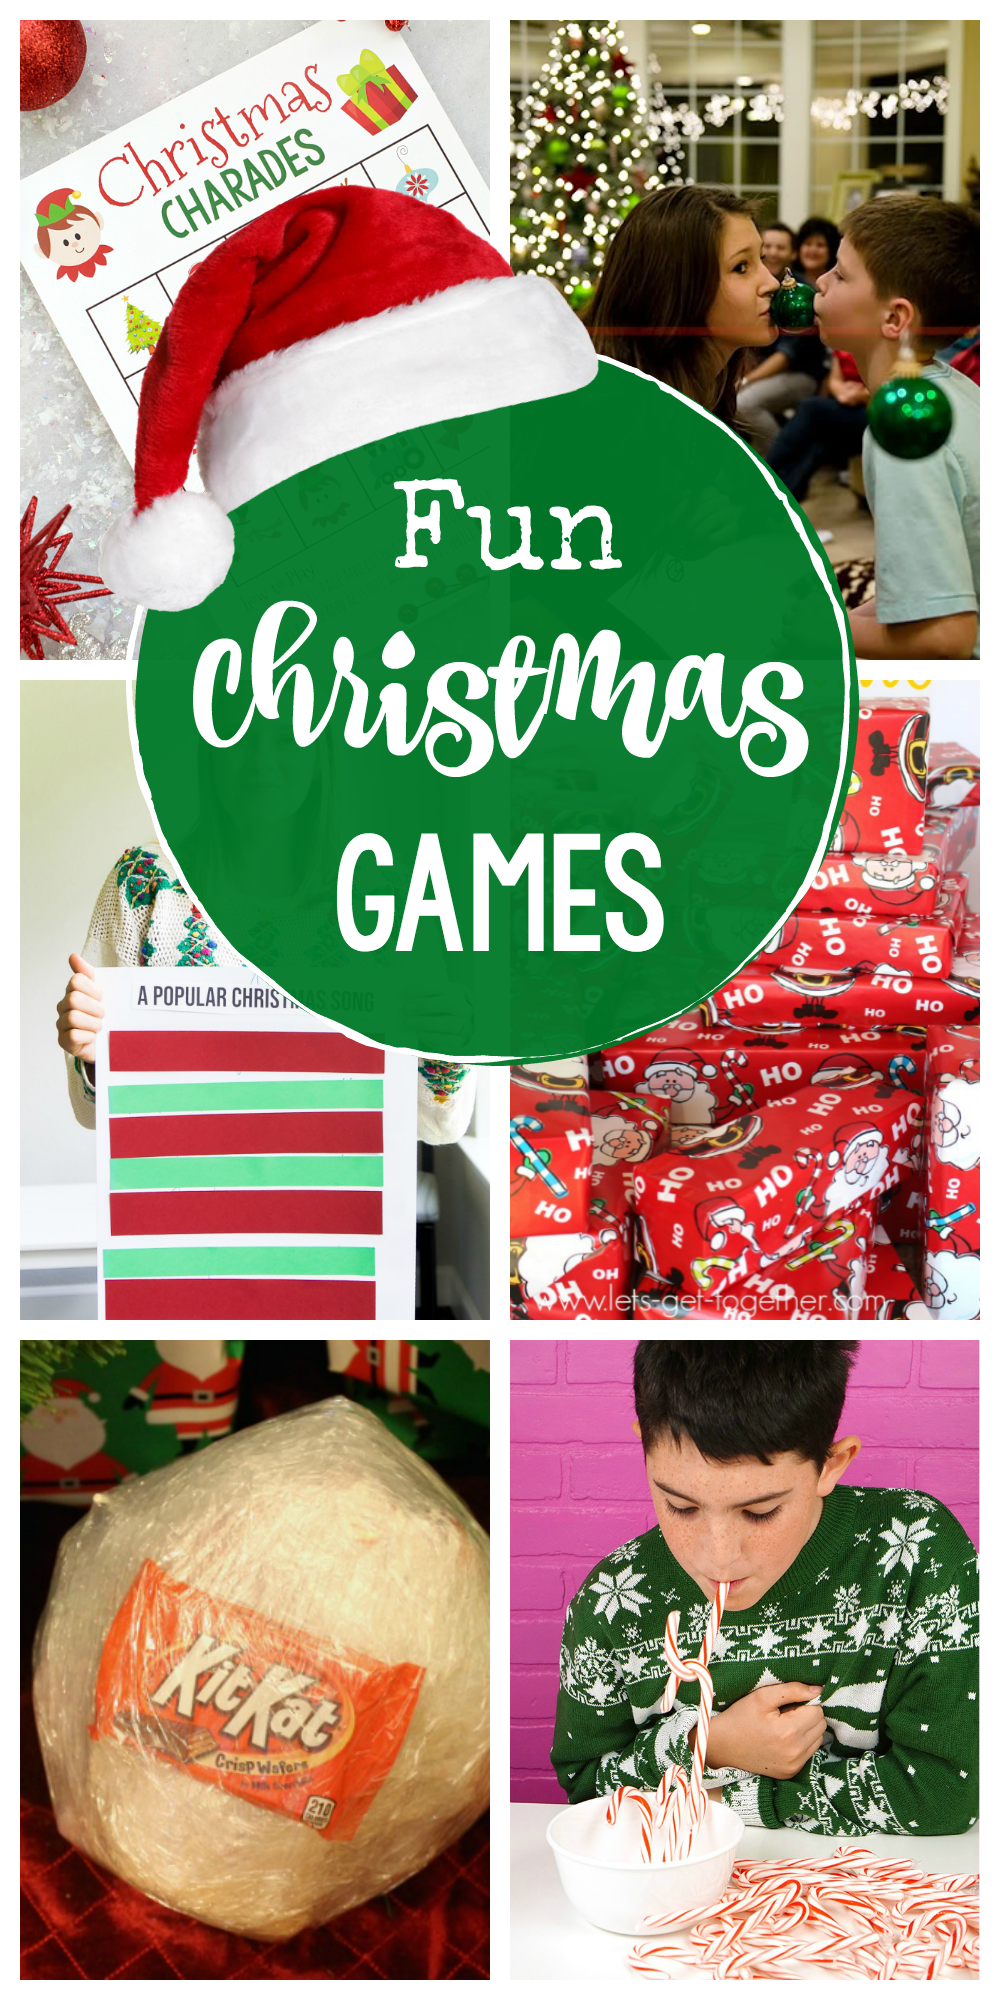 Fun Christmas Games for Your Holiday Parties - Fun Christmas Games for Your Holiday Parties -   18 diy Christmas games ideas